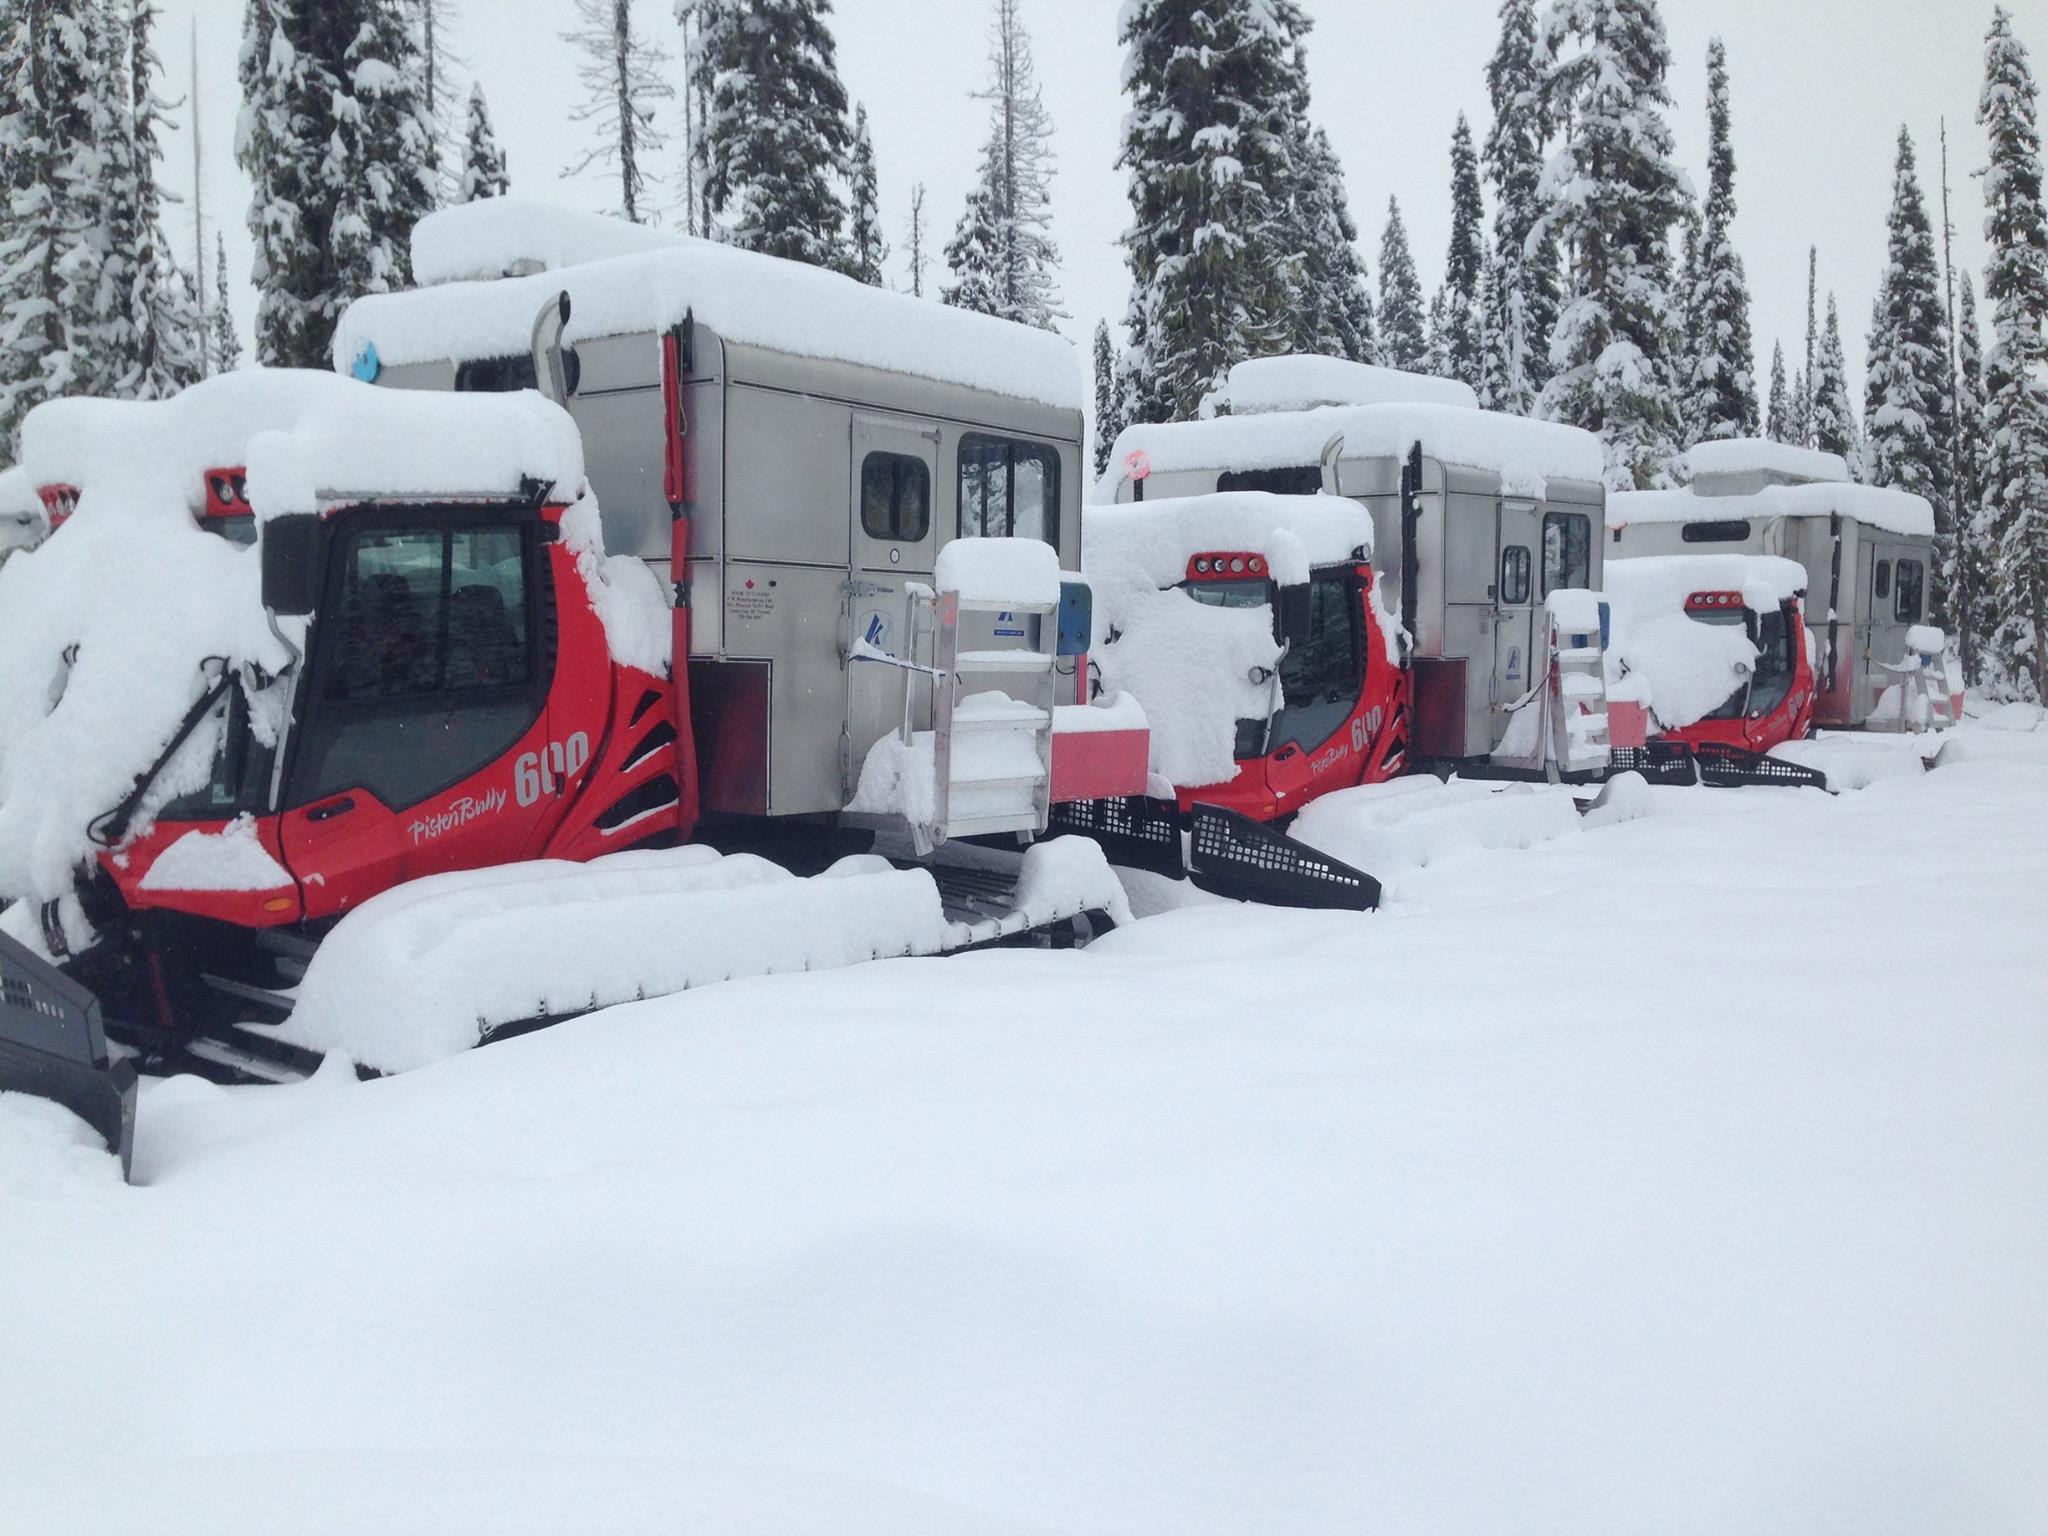 These Snowcats are waiting for you at K3 Catskiing